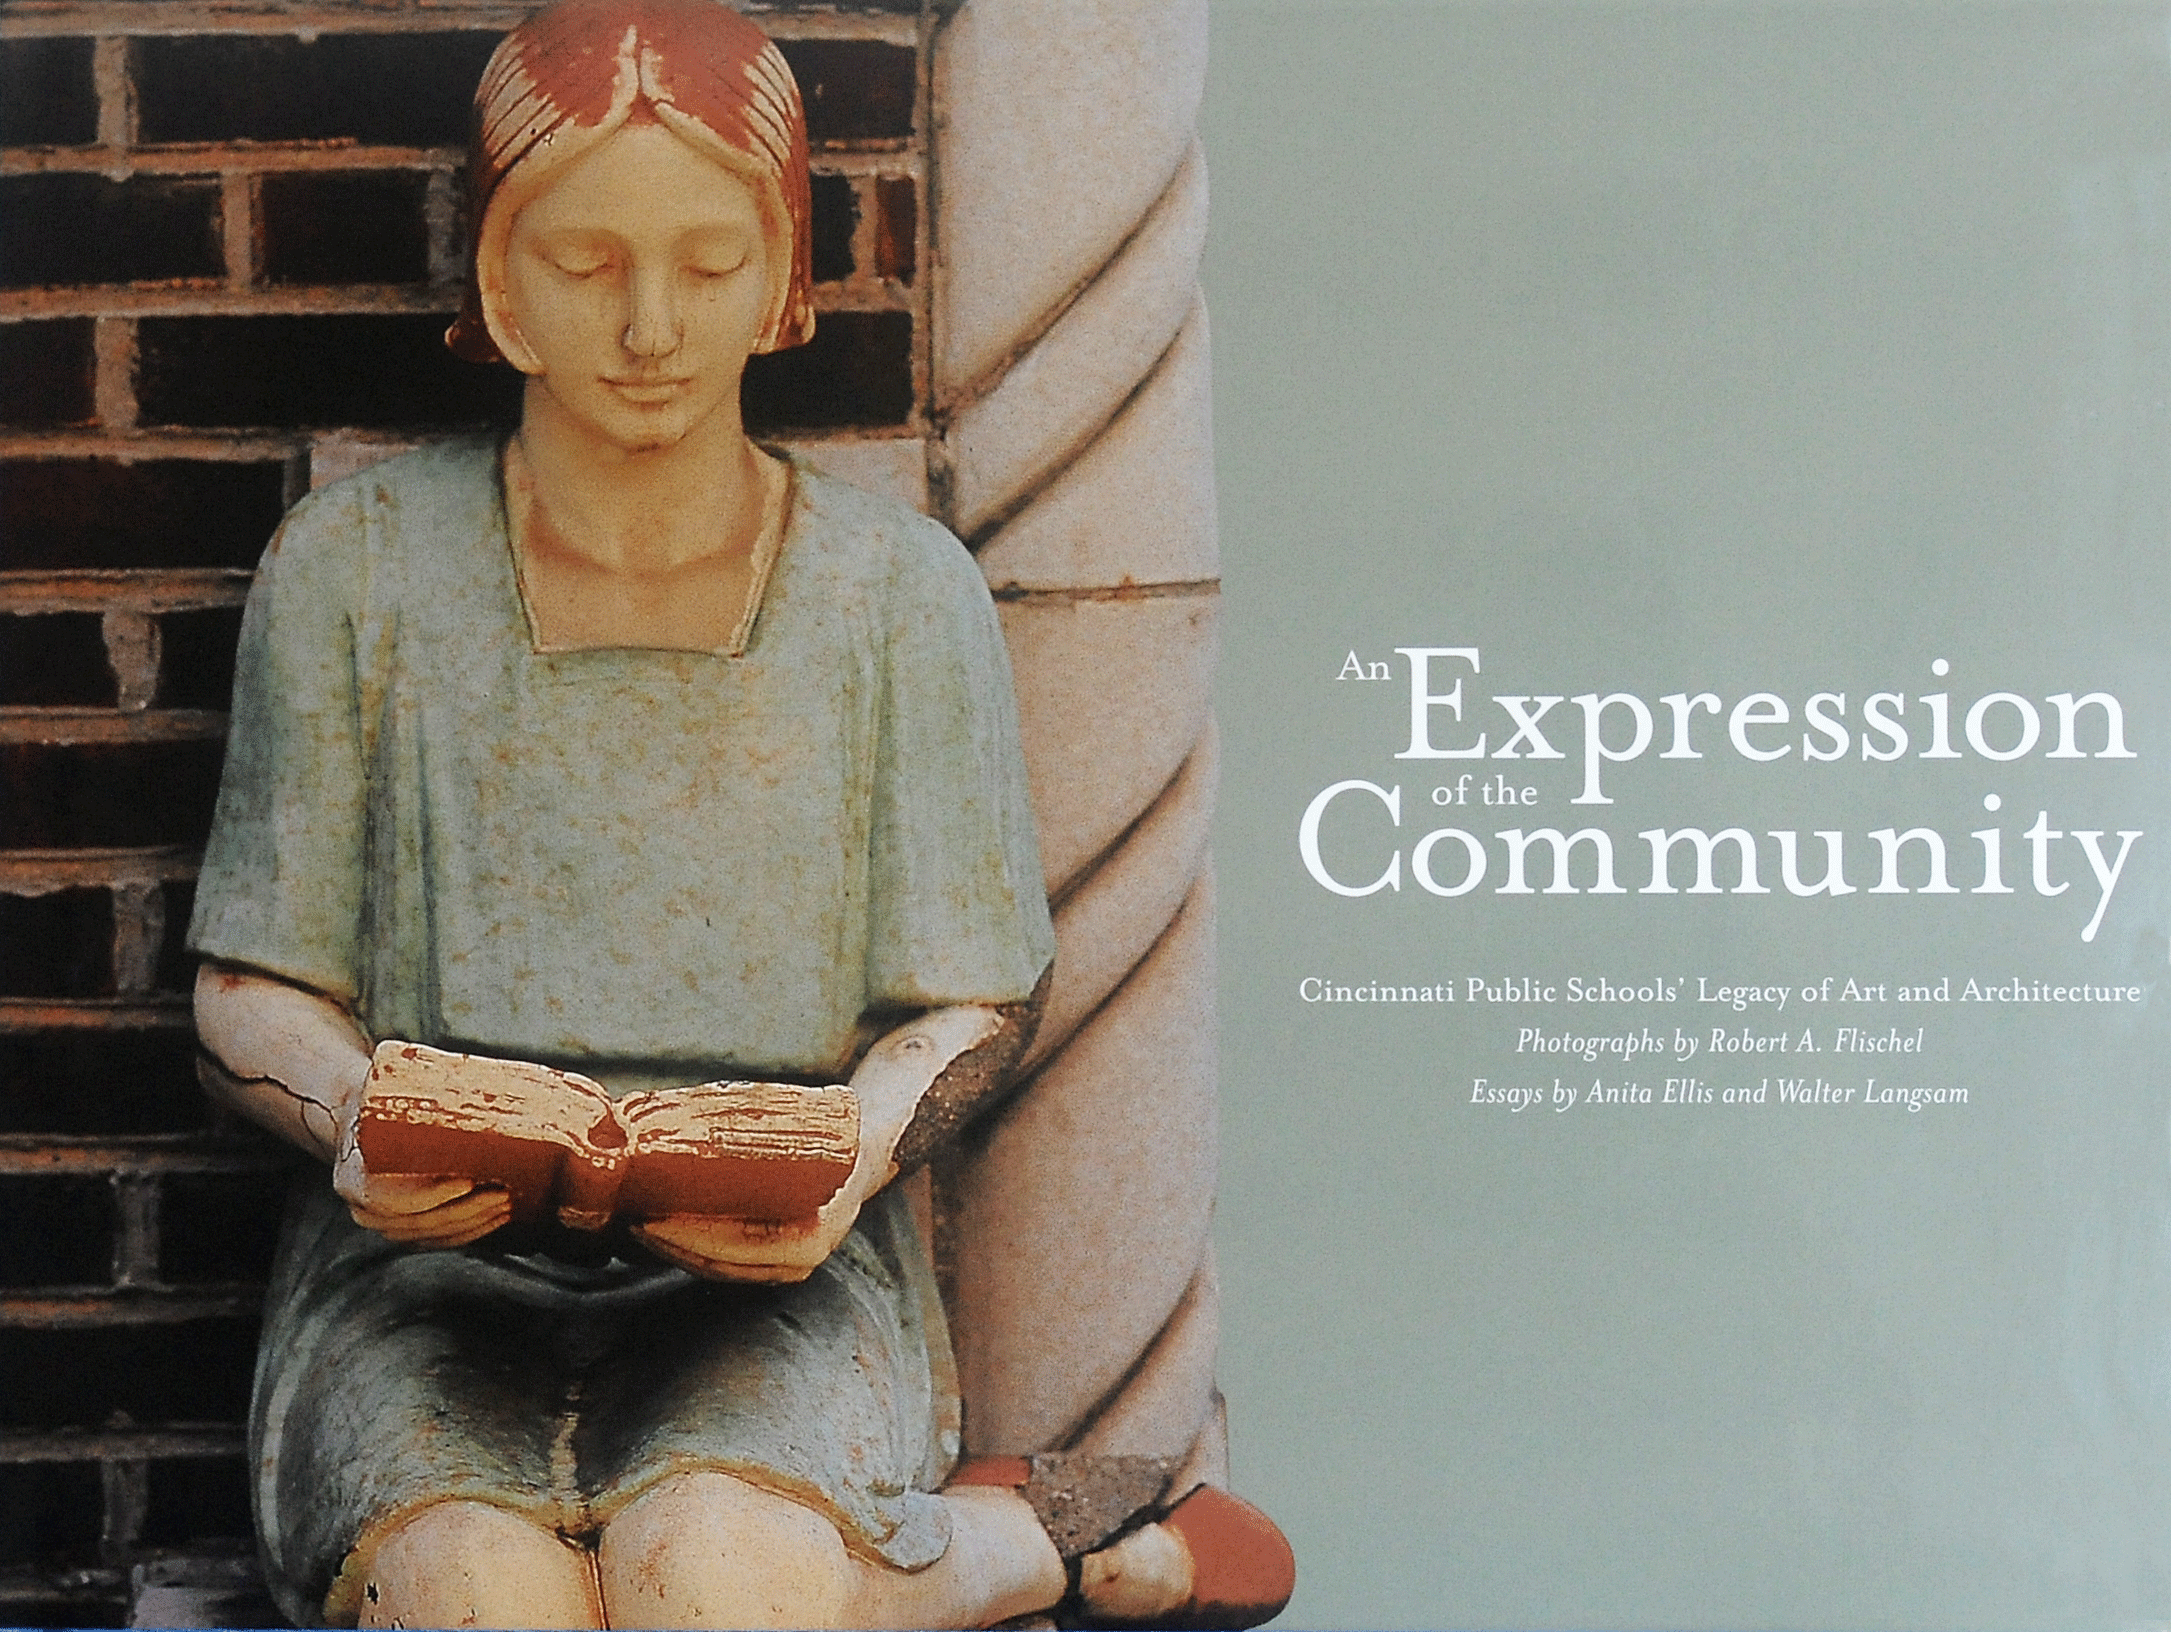 Book Jacet Image of "An Expression of the Community"